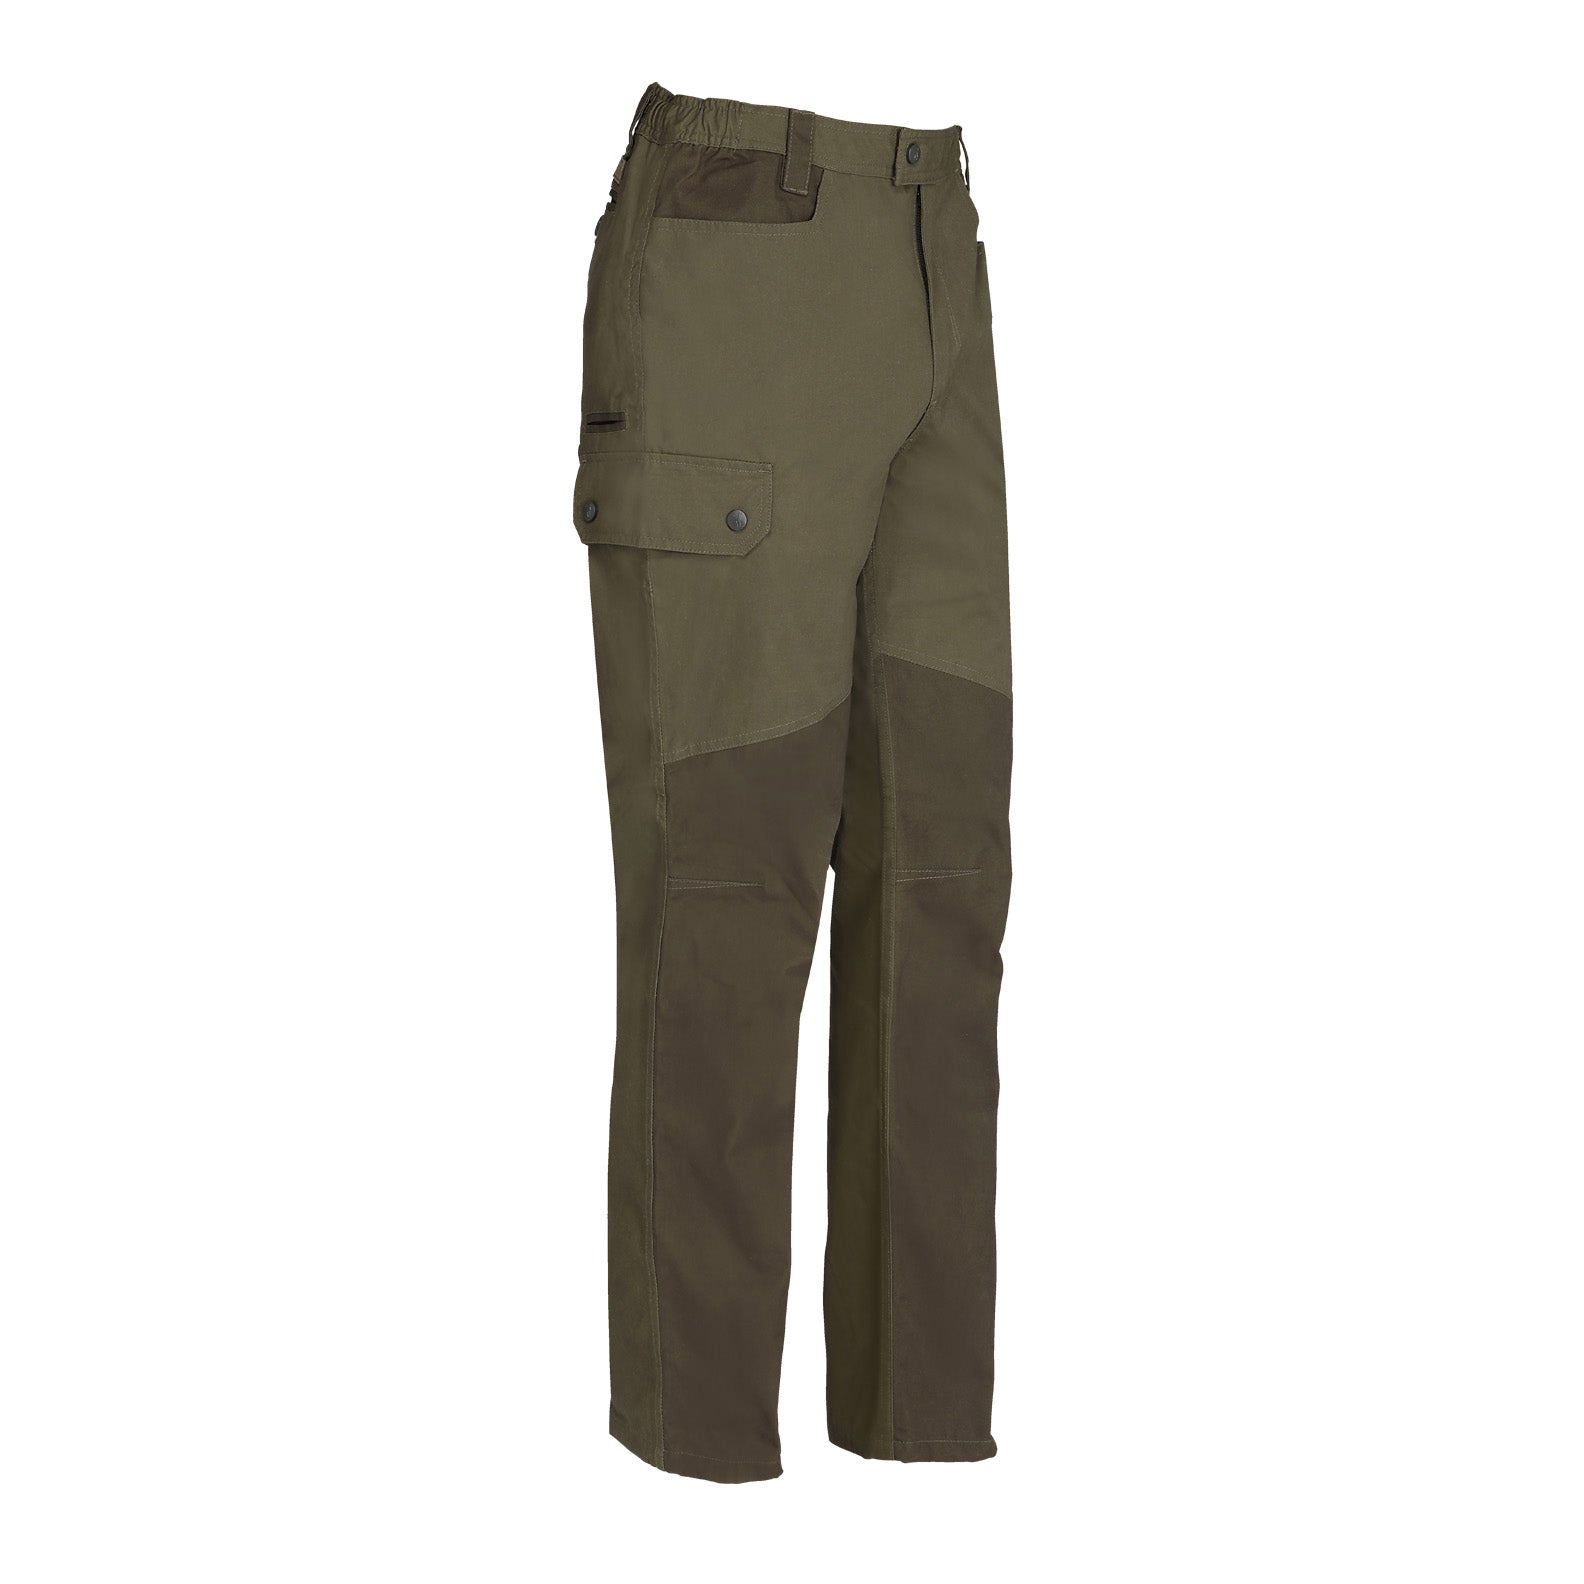 Hunting Trousers for Men - Shop Online at Ruoto